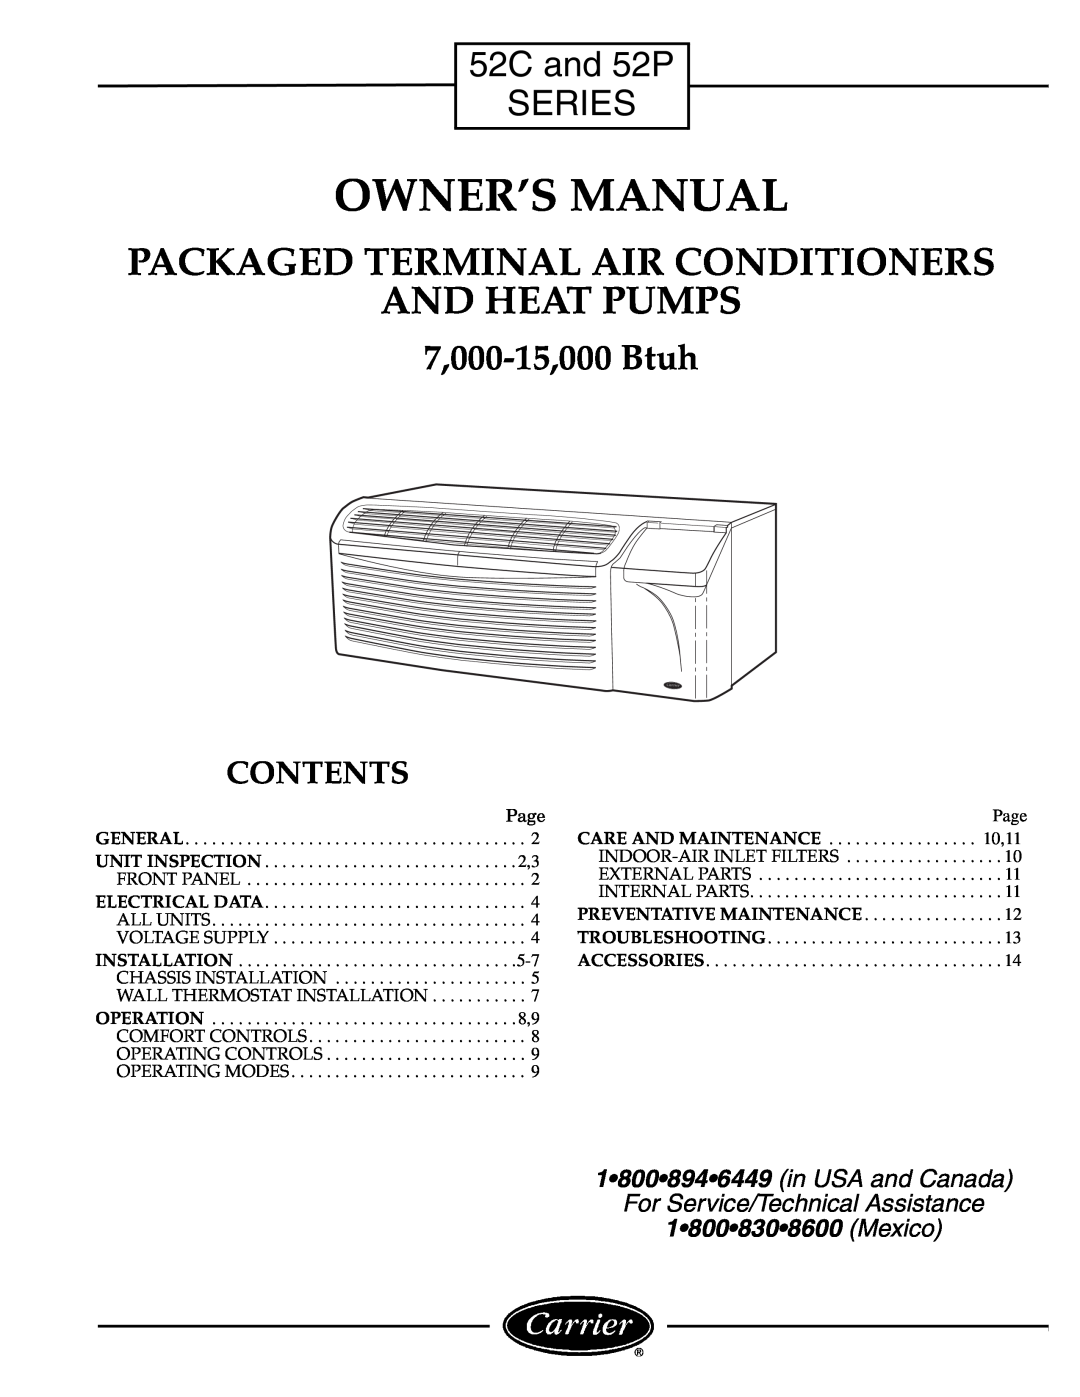 Carrier Access owner manual 52C 52Cand 52P, Series, Contents, Packaged Terminal Air Conditioners And Heat Pumps 